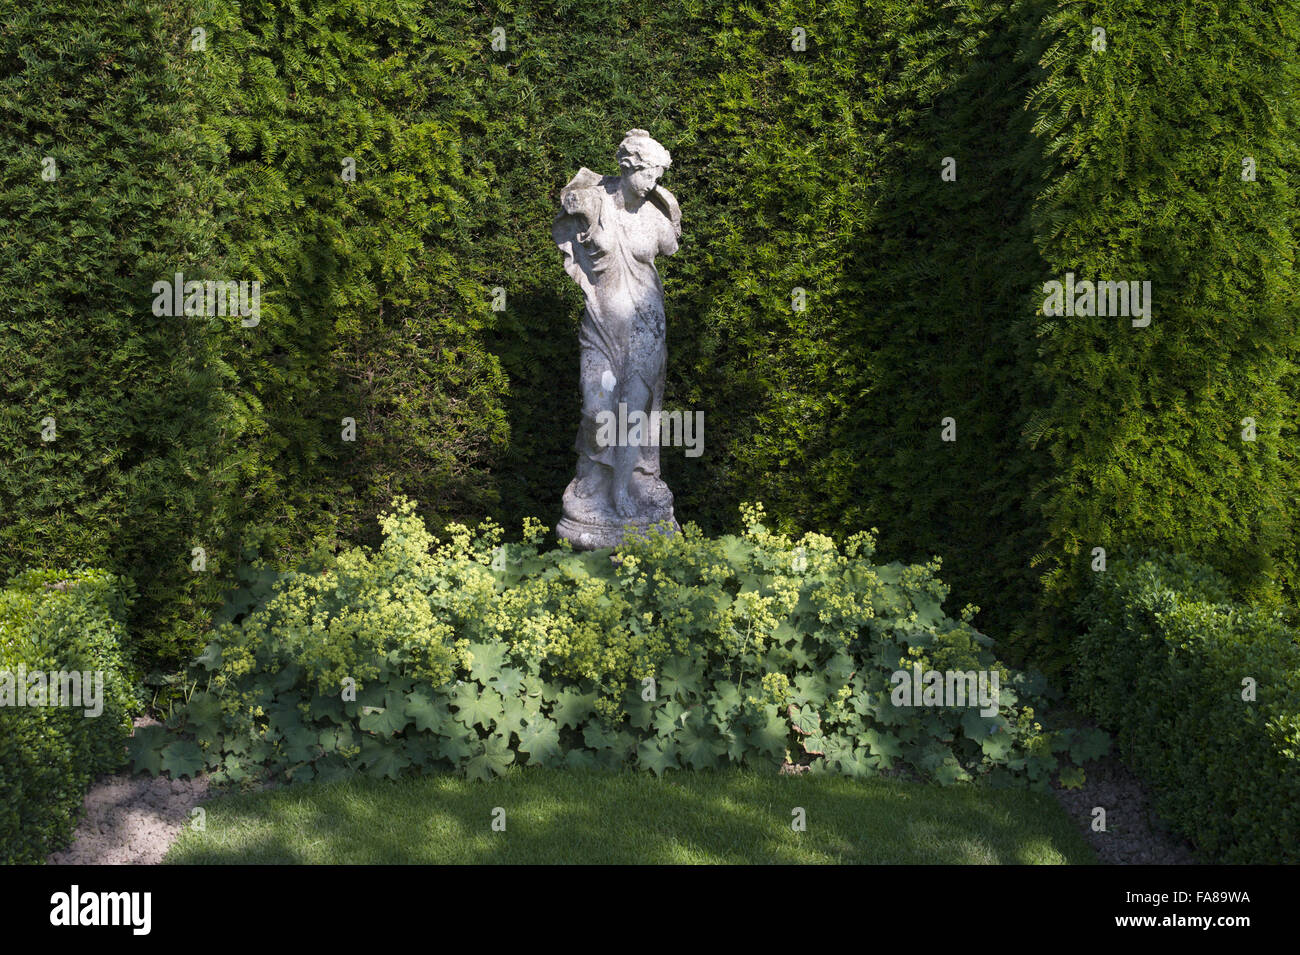 A statue in the gardens in July at Sissinghurst Castle, Kent. Sissinghurst gained international fame in the 1930s when Vita Sackville-West and Harold Nicolson created a garden there. Stock Photo